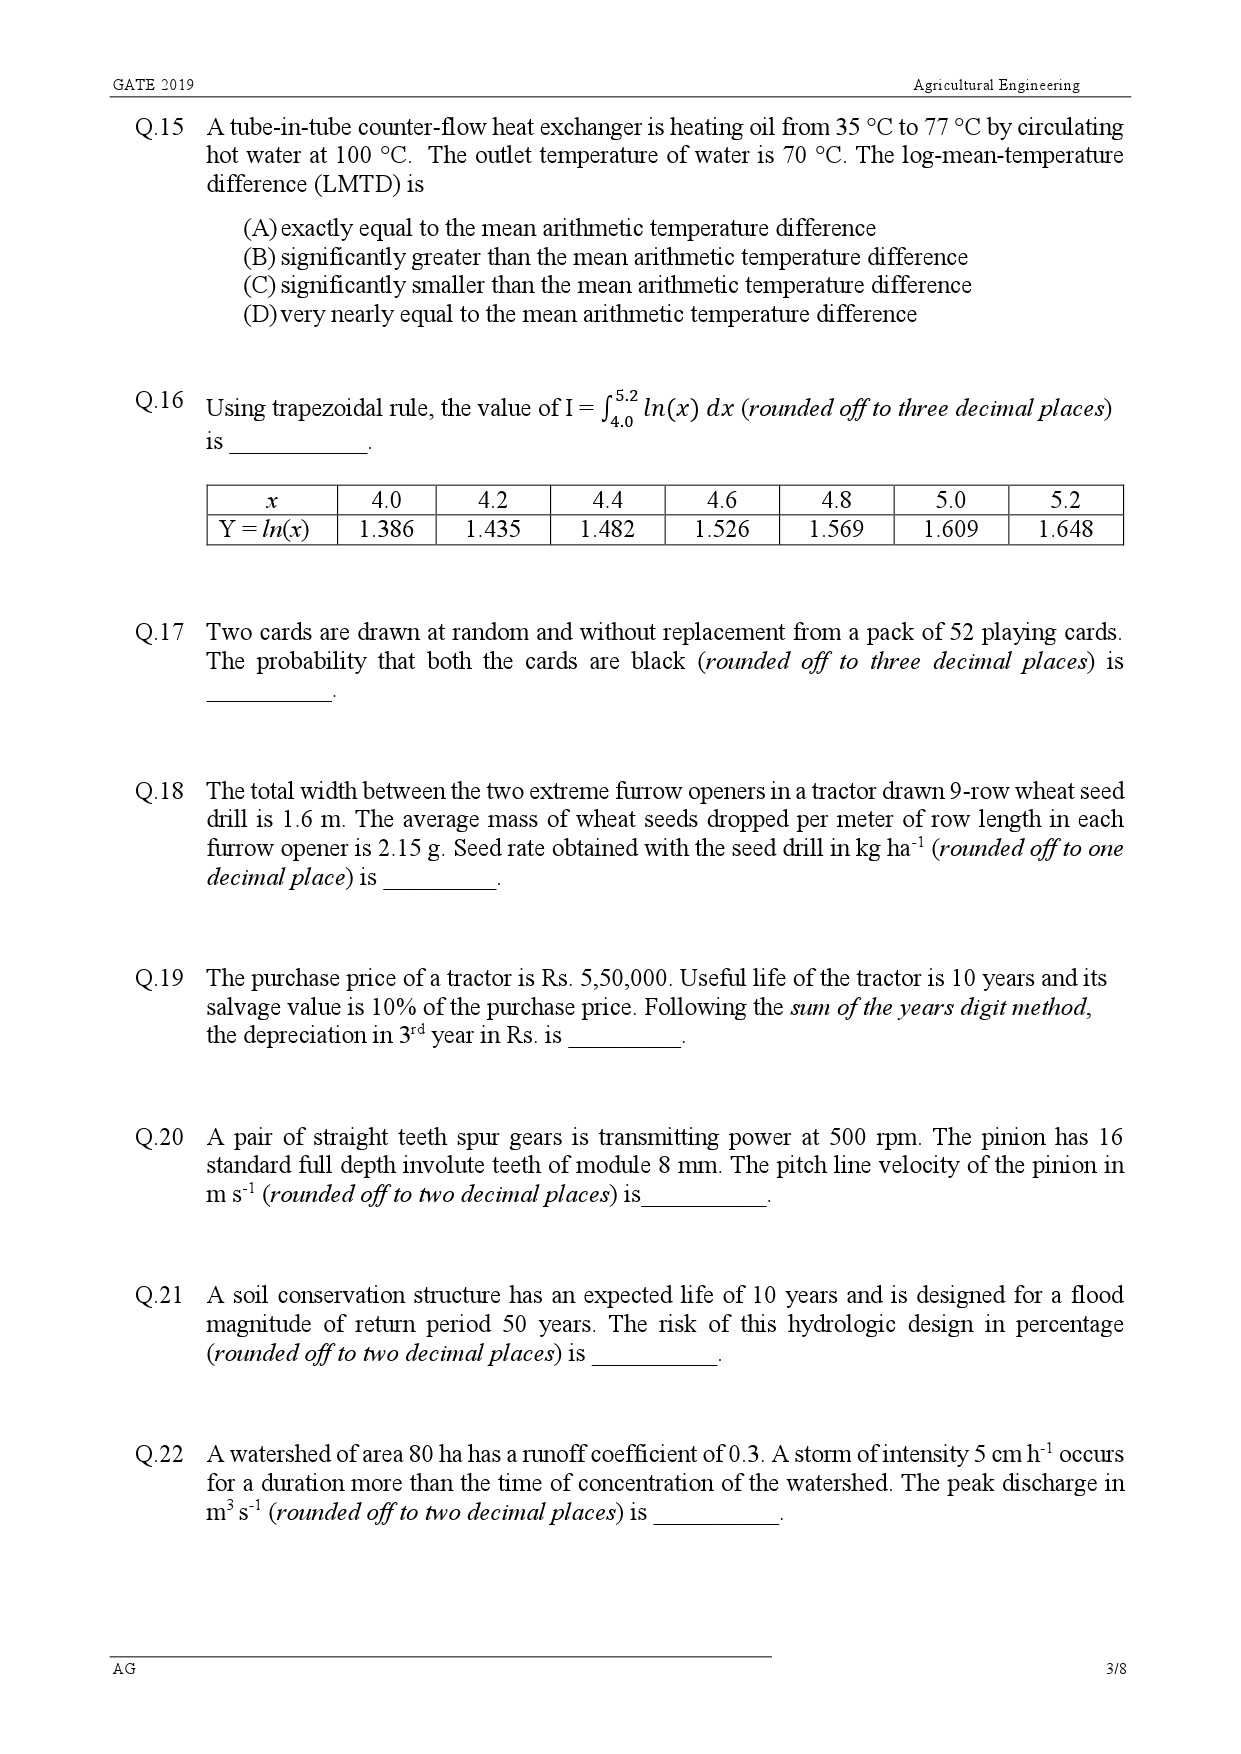 GATE Exam Question Paper 2019 Agricultural Engineering 3